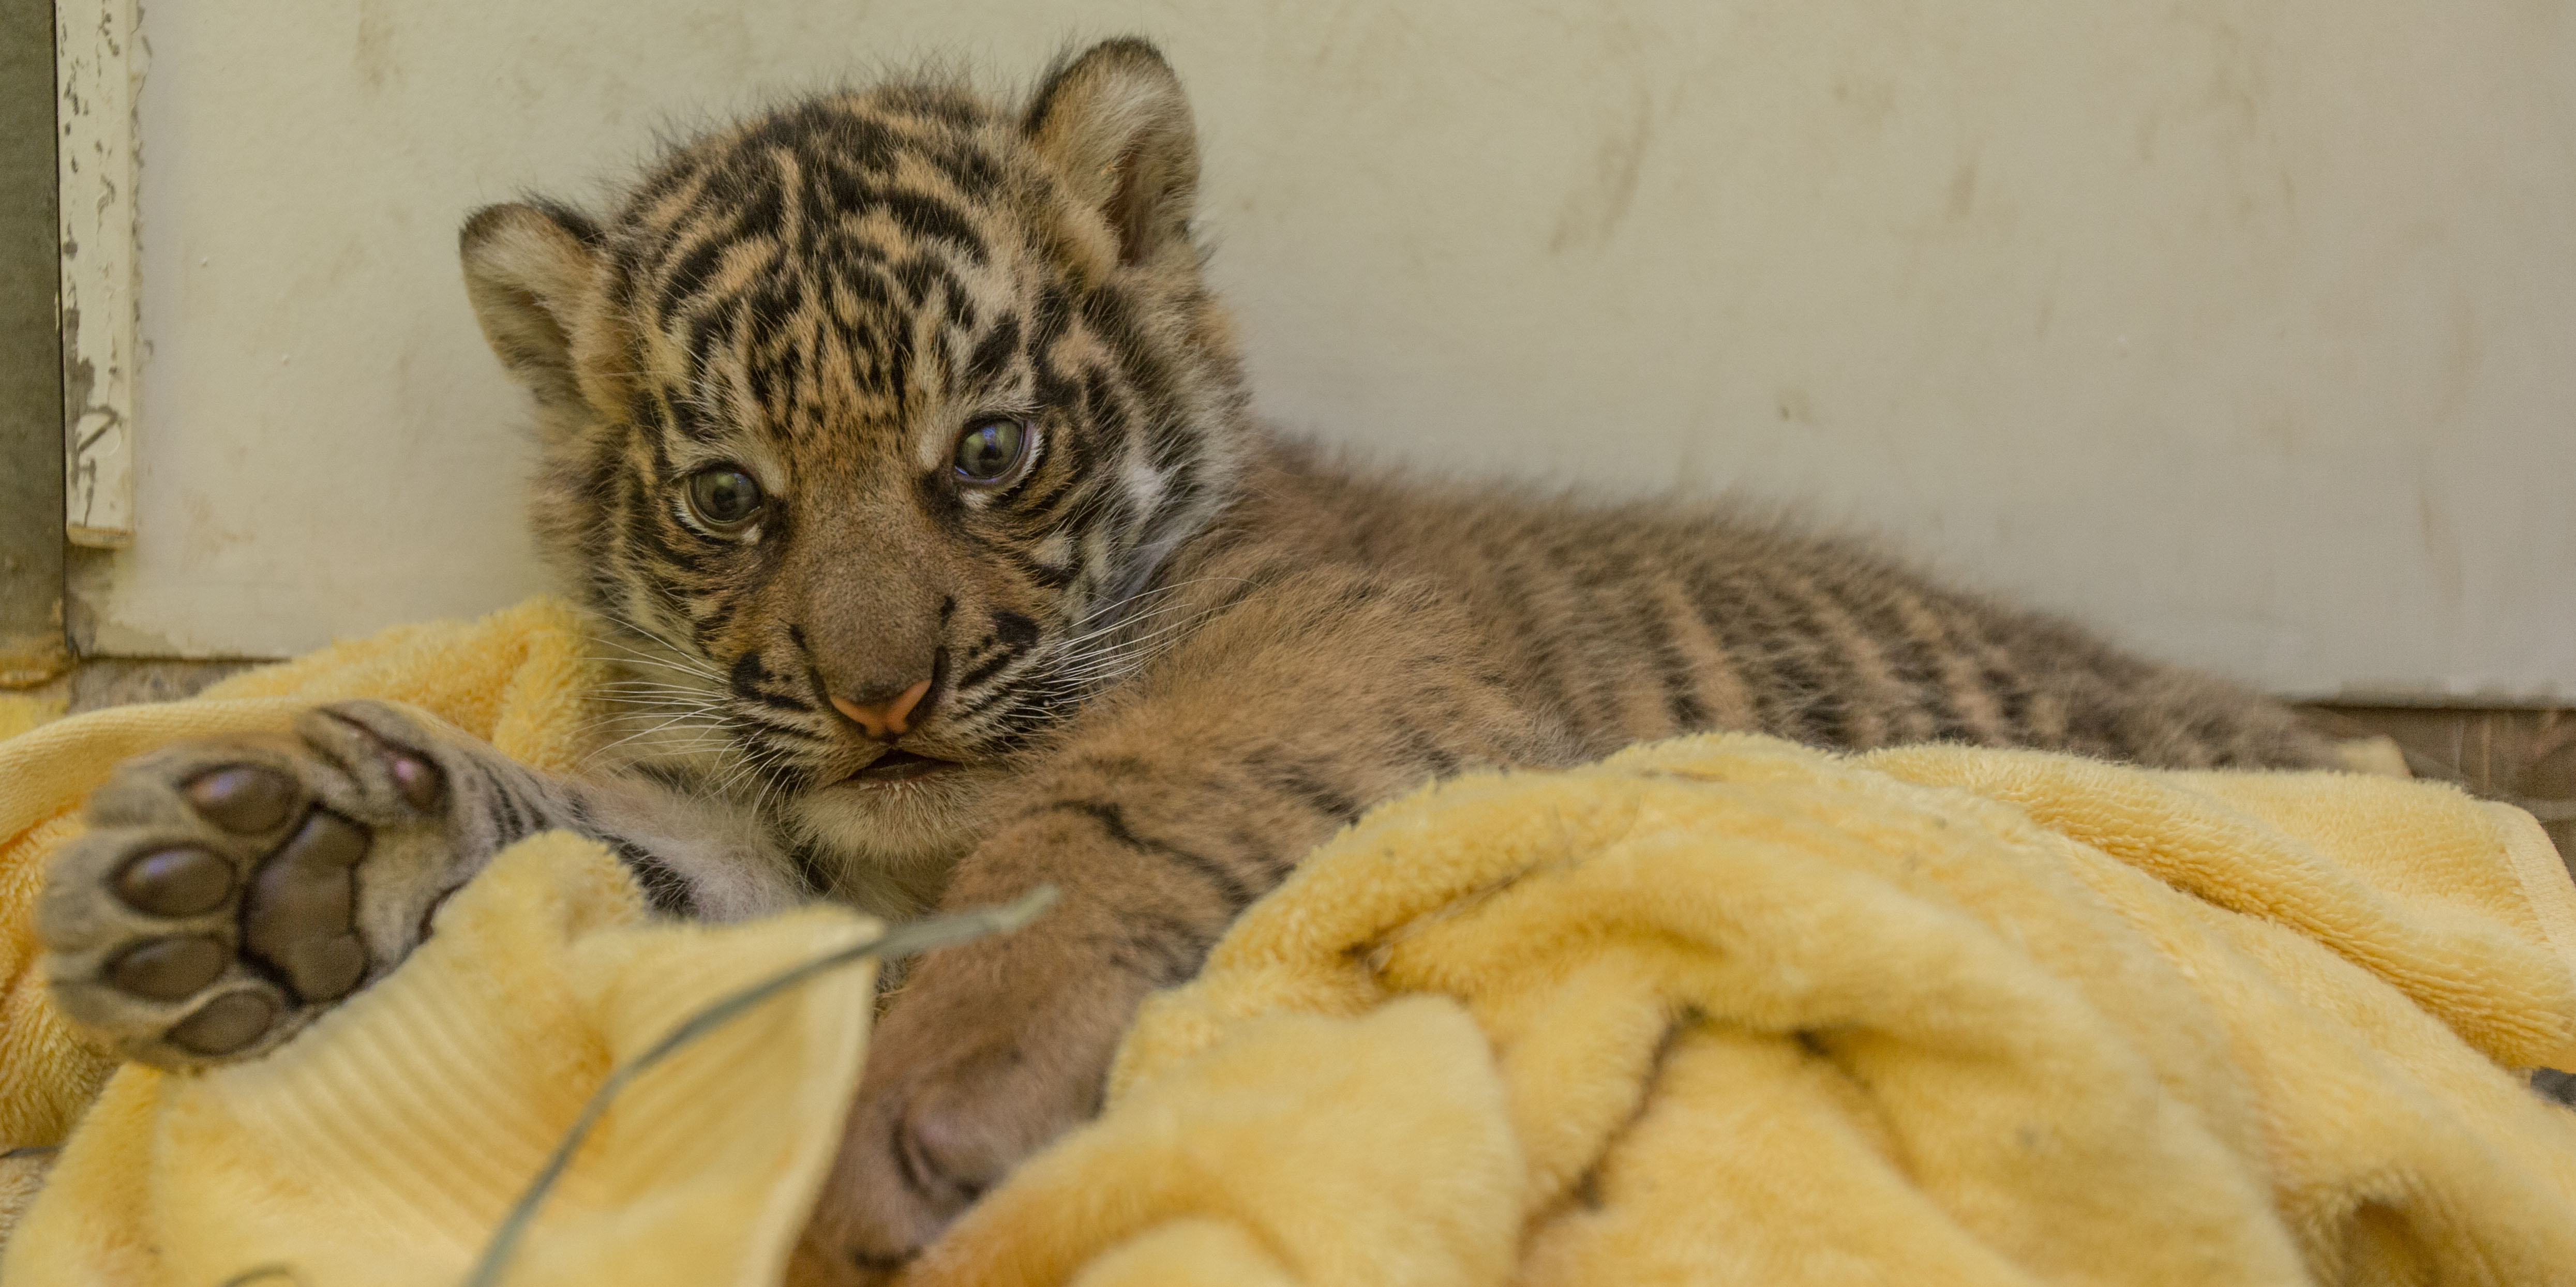 National Zoo Is Hoping For Tiger Babies